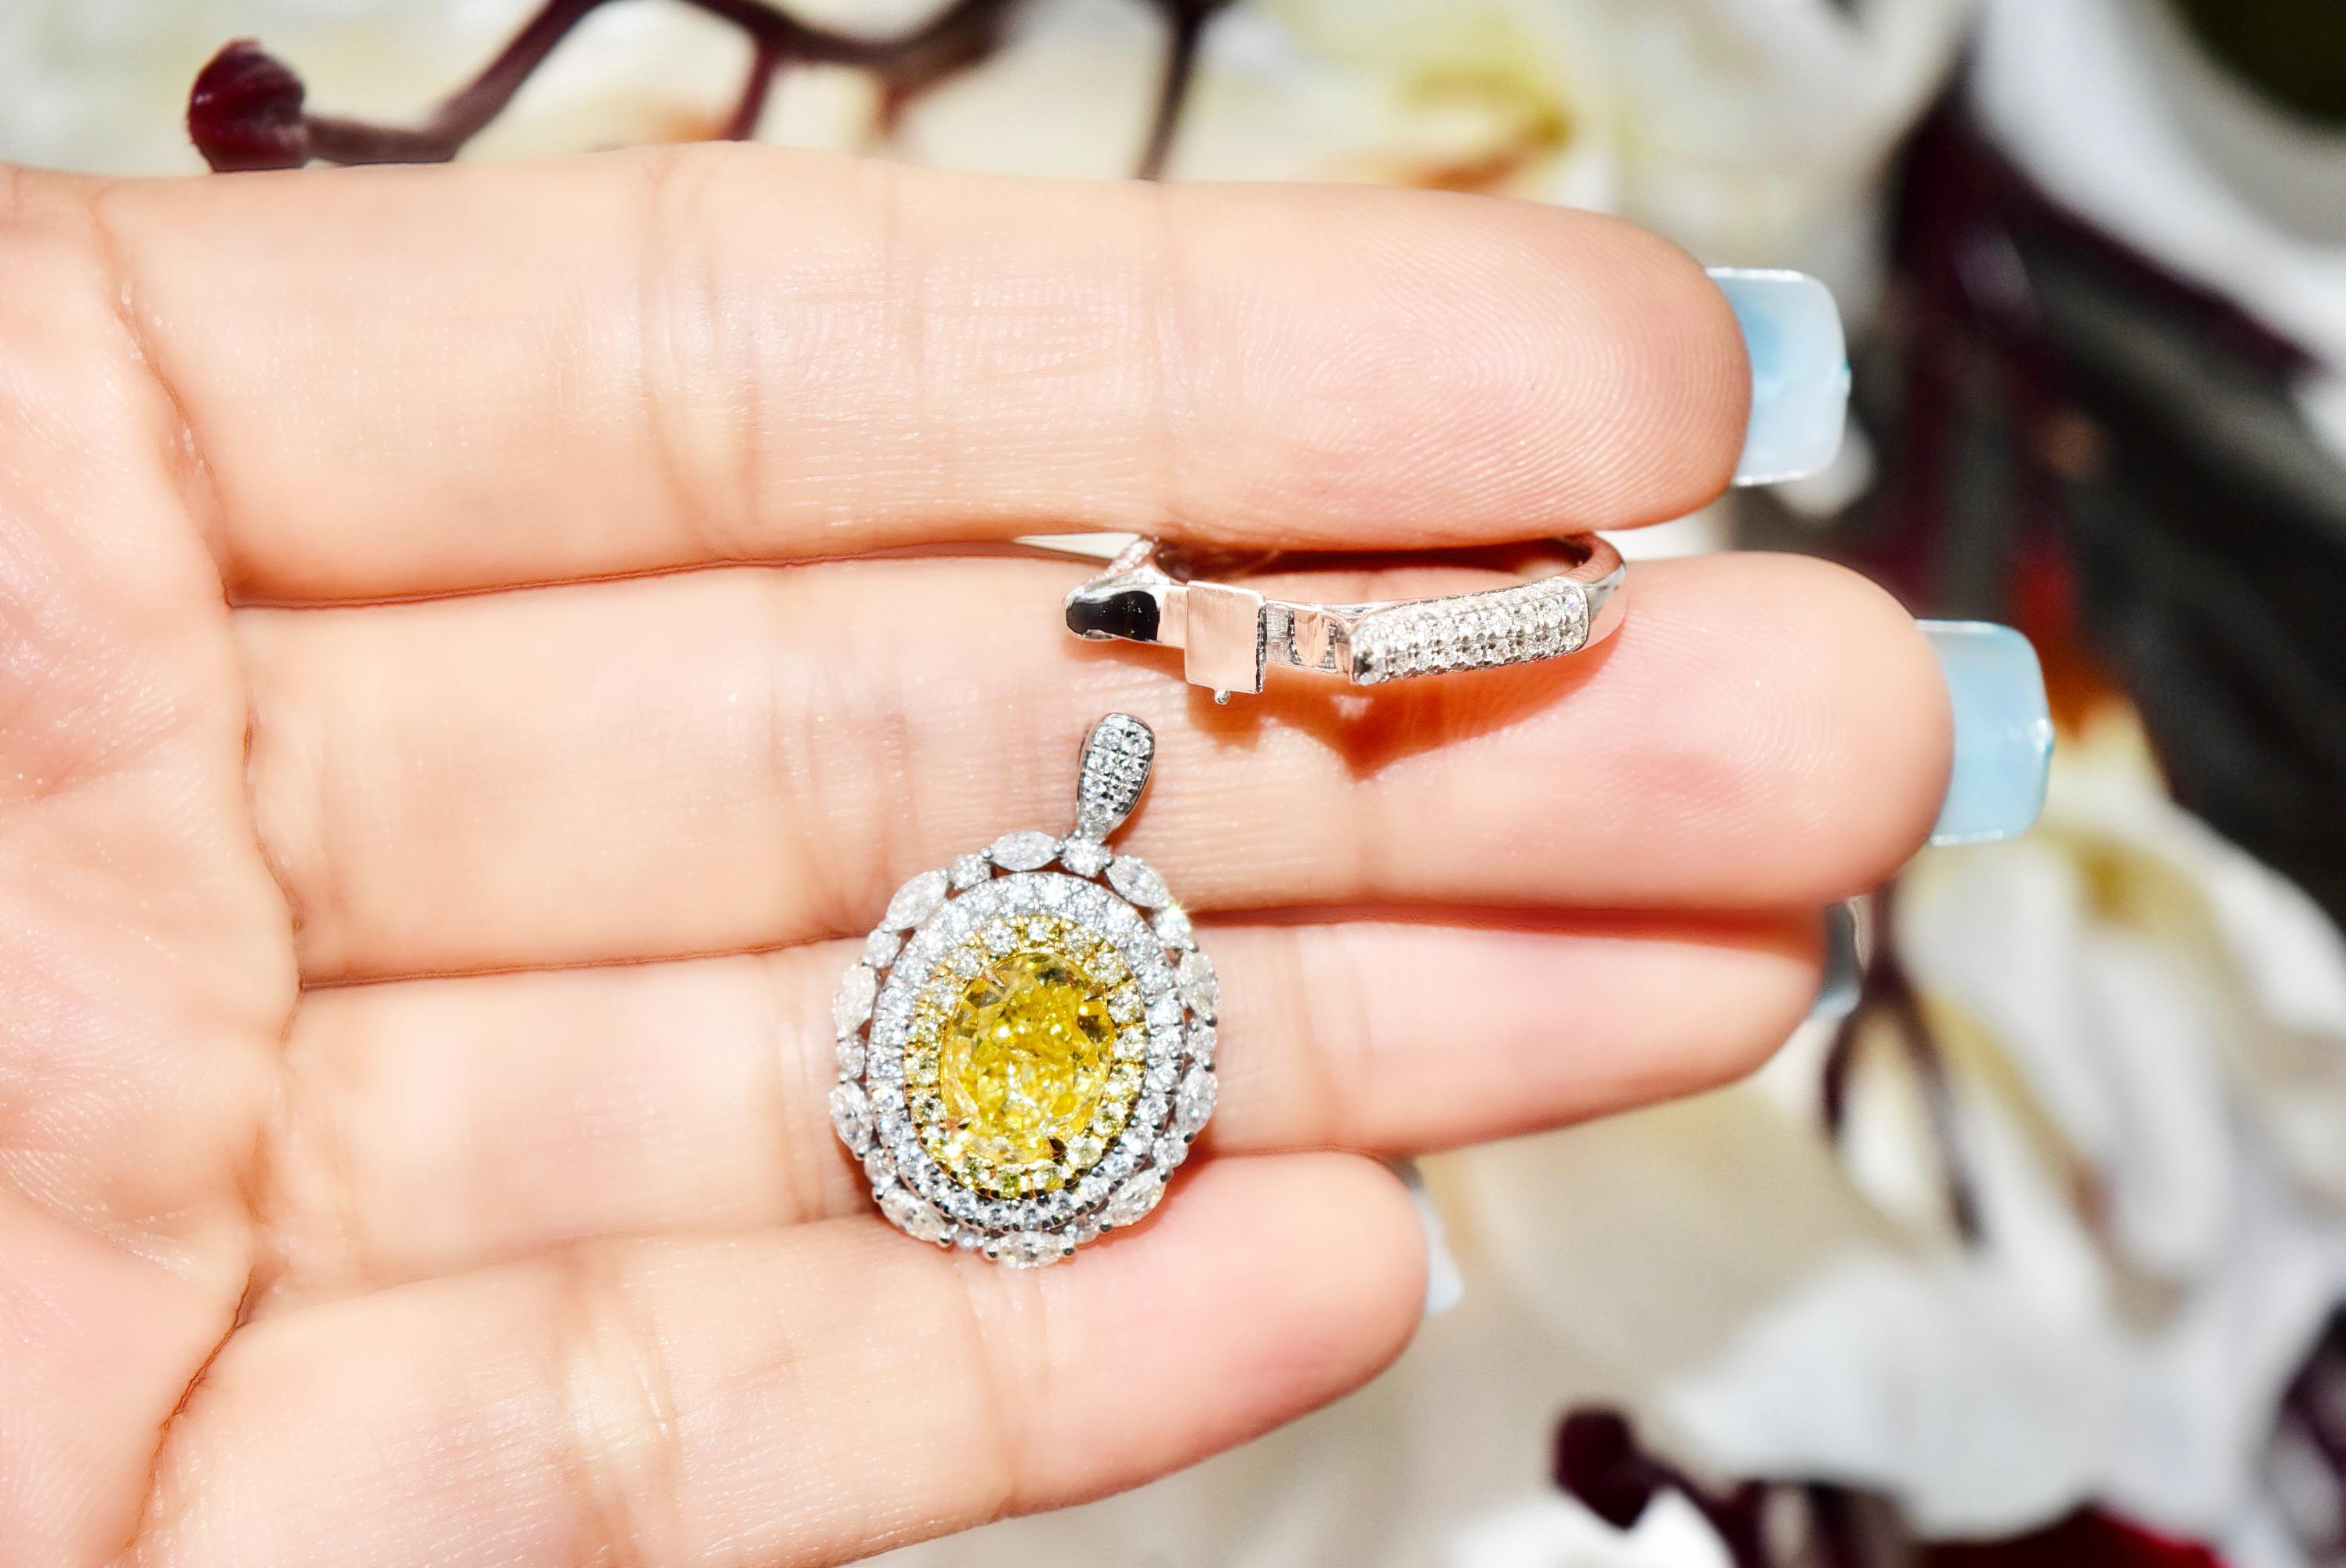 **100% NATURAL FANCY COLOUR DIAMOND JEWELRY**

✪ Jewelry Details ✪

♦ MAIN STONE DETAILS

➛ Stone Shape: Oval 
➛ Stone Color: Fancy Yellow
➛ Stone Weight: 2.02 carat
➛ Clarity: I2
➛ GIA certified

♦ SIDE STONE DETAILS

➛ Side White Diamonds - 114